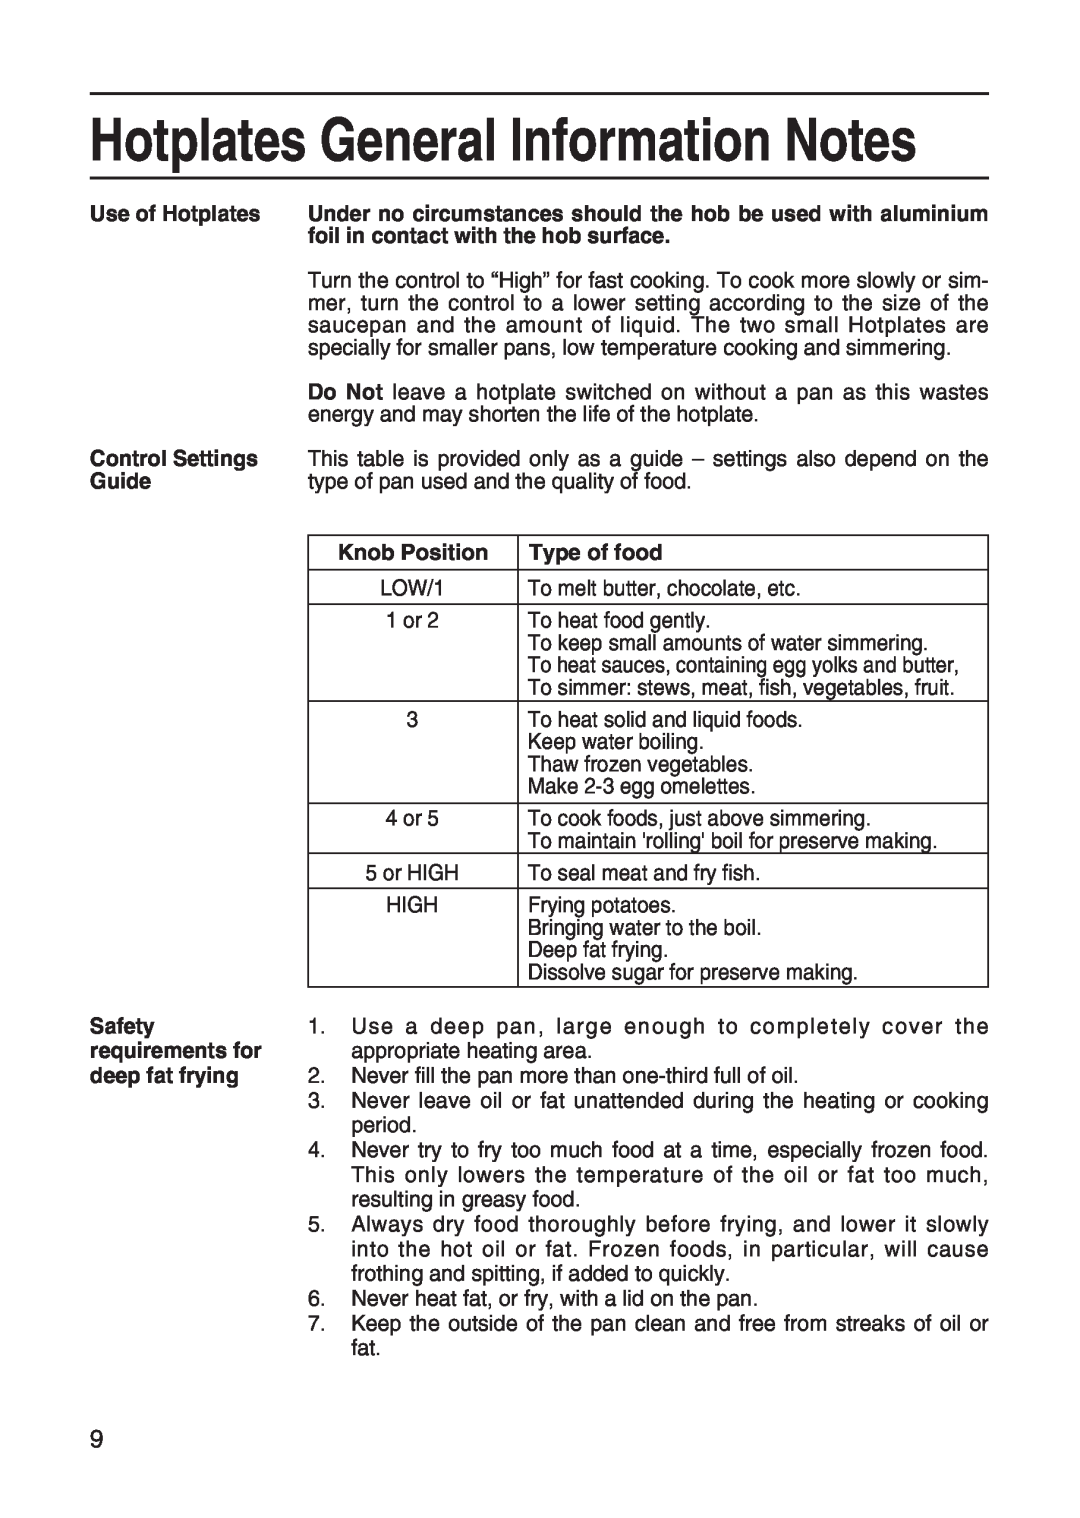 Hotpoint EH10 manual Hotplates General Information Notes 